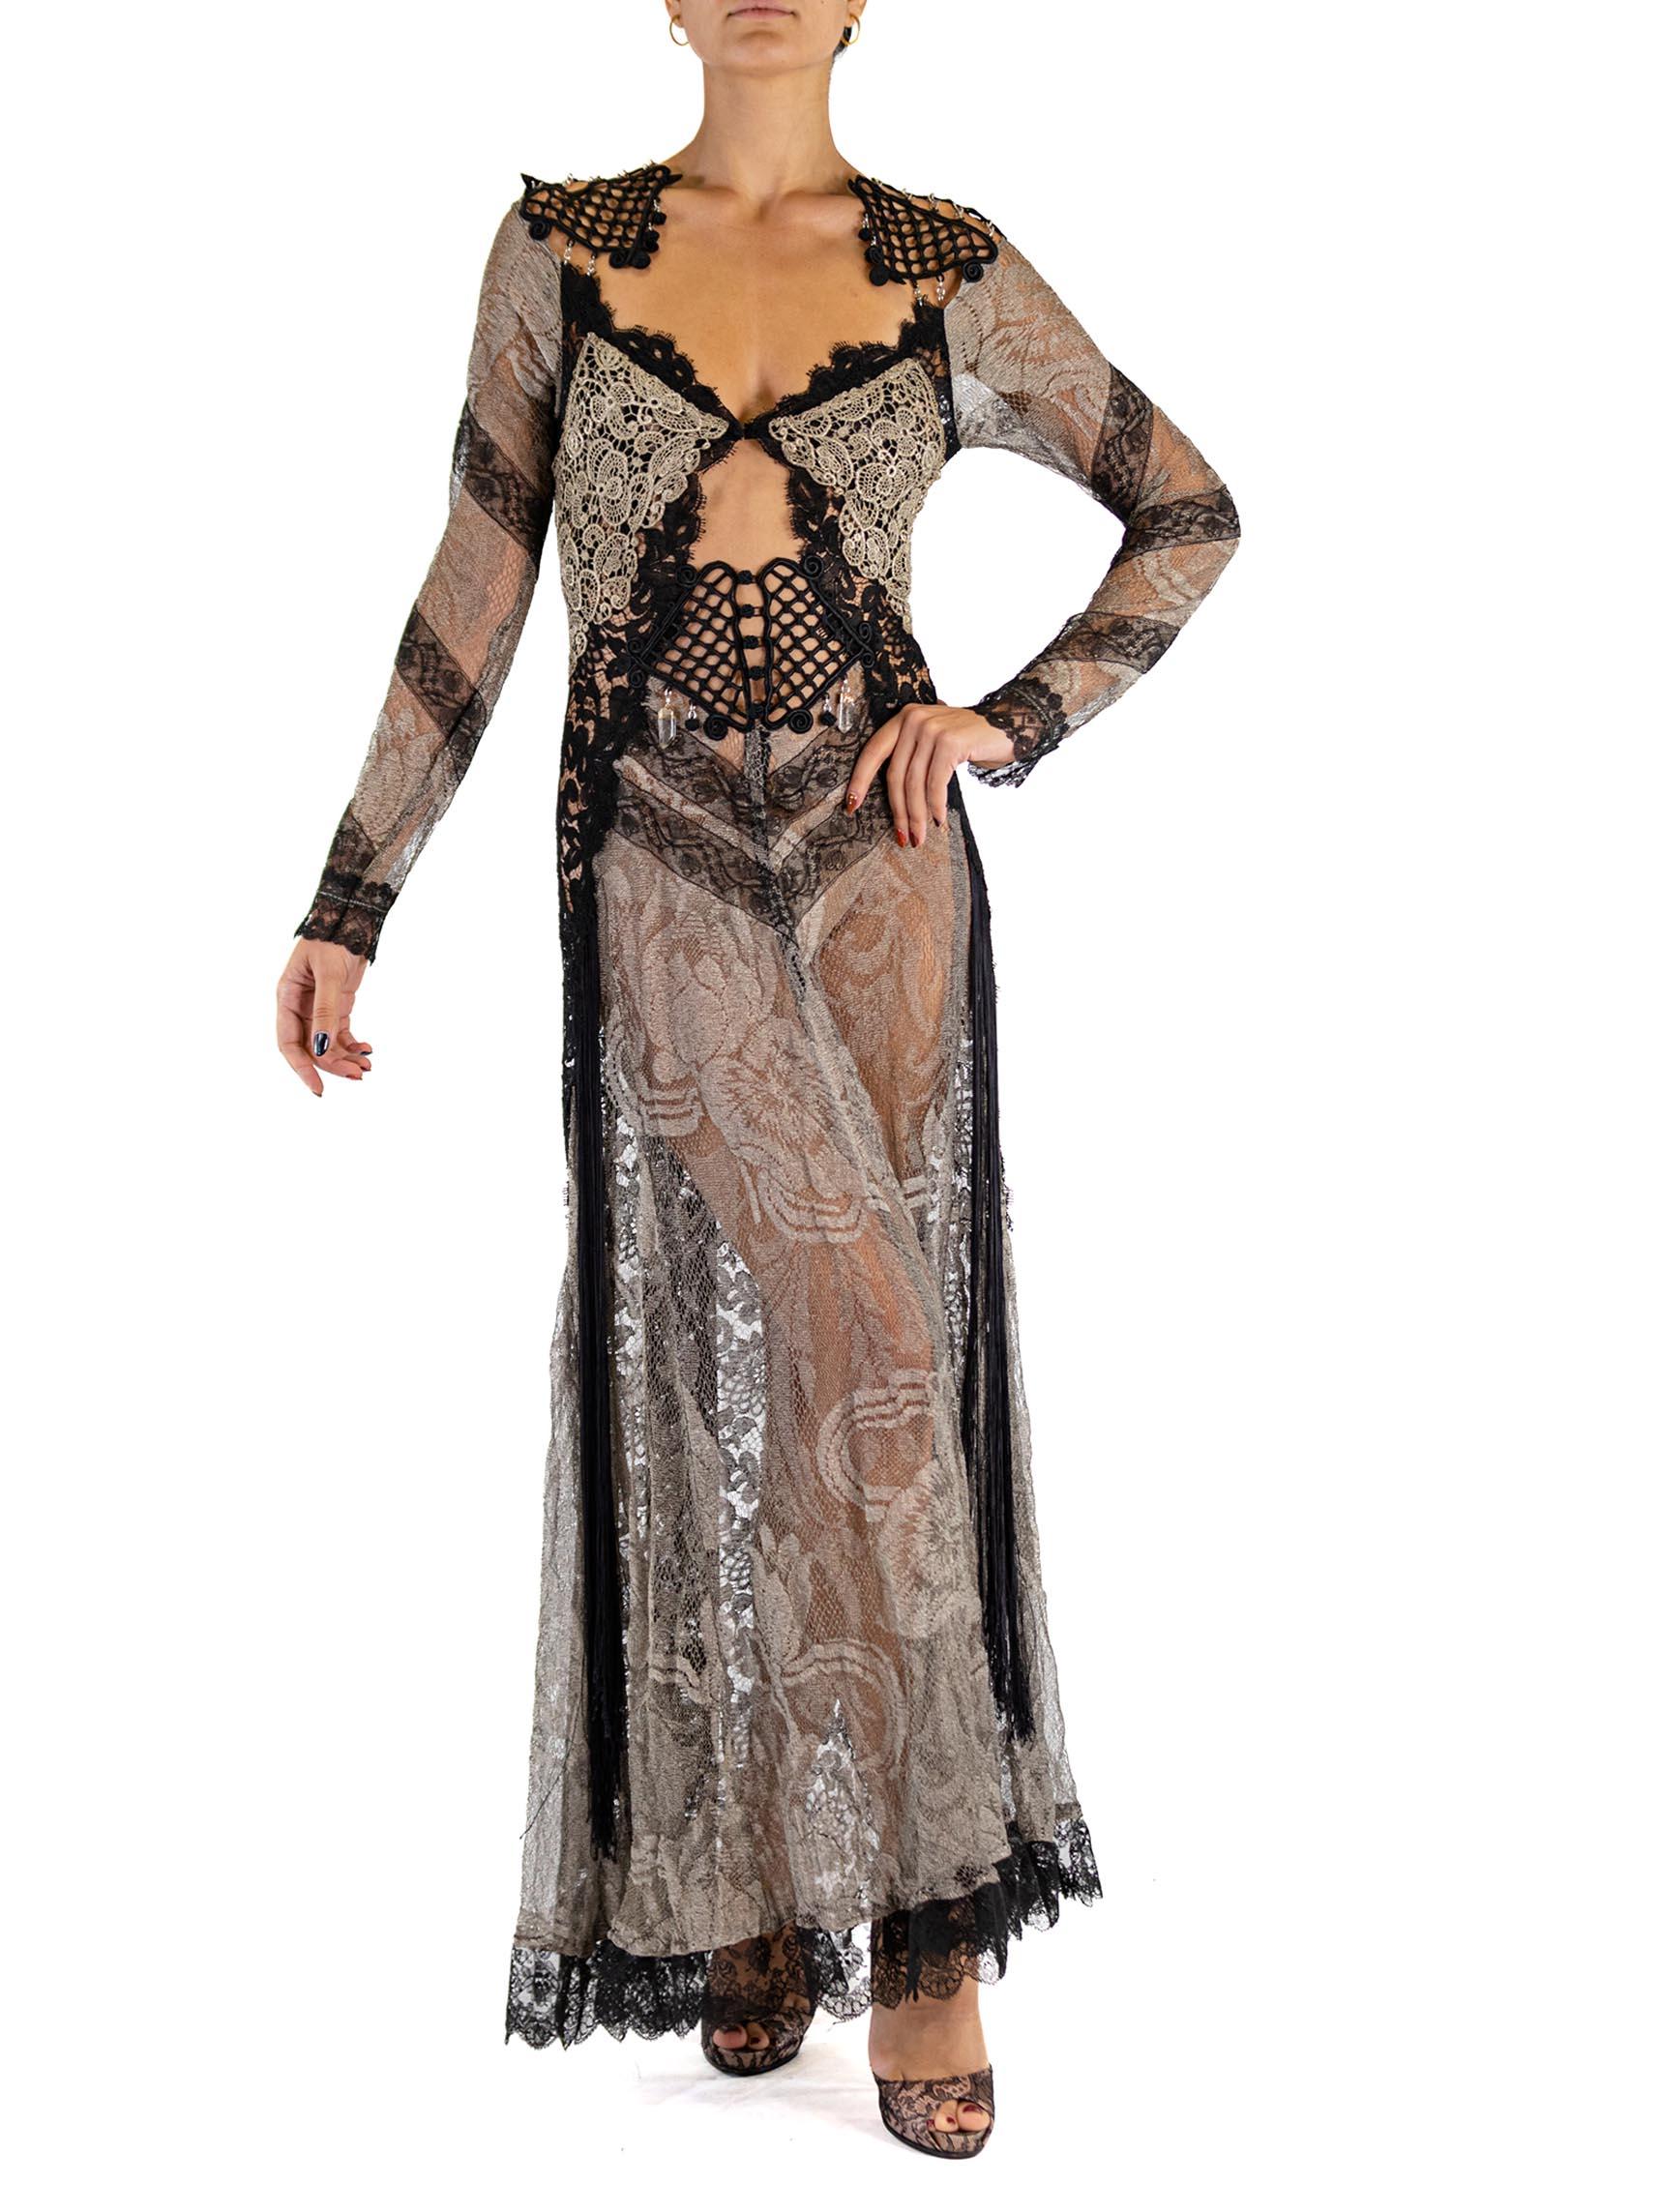 MORPHEW ATELIER Black & Silver Antique Lace Sleeved Gown With Quartz Crystals In Excellent Condition For Sale In New York, NY